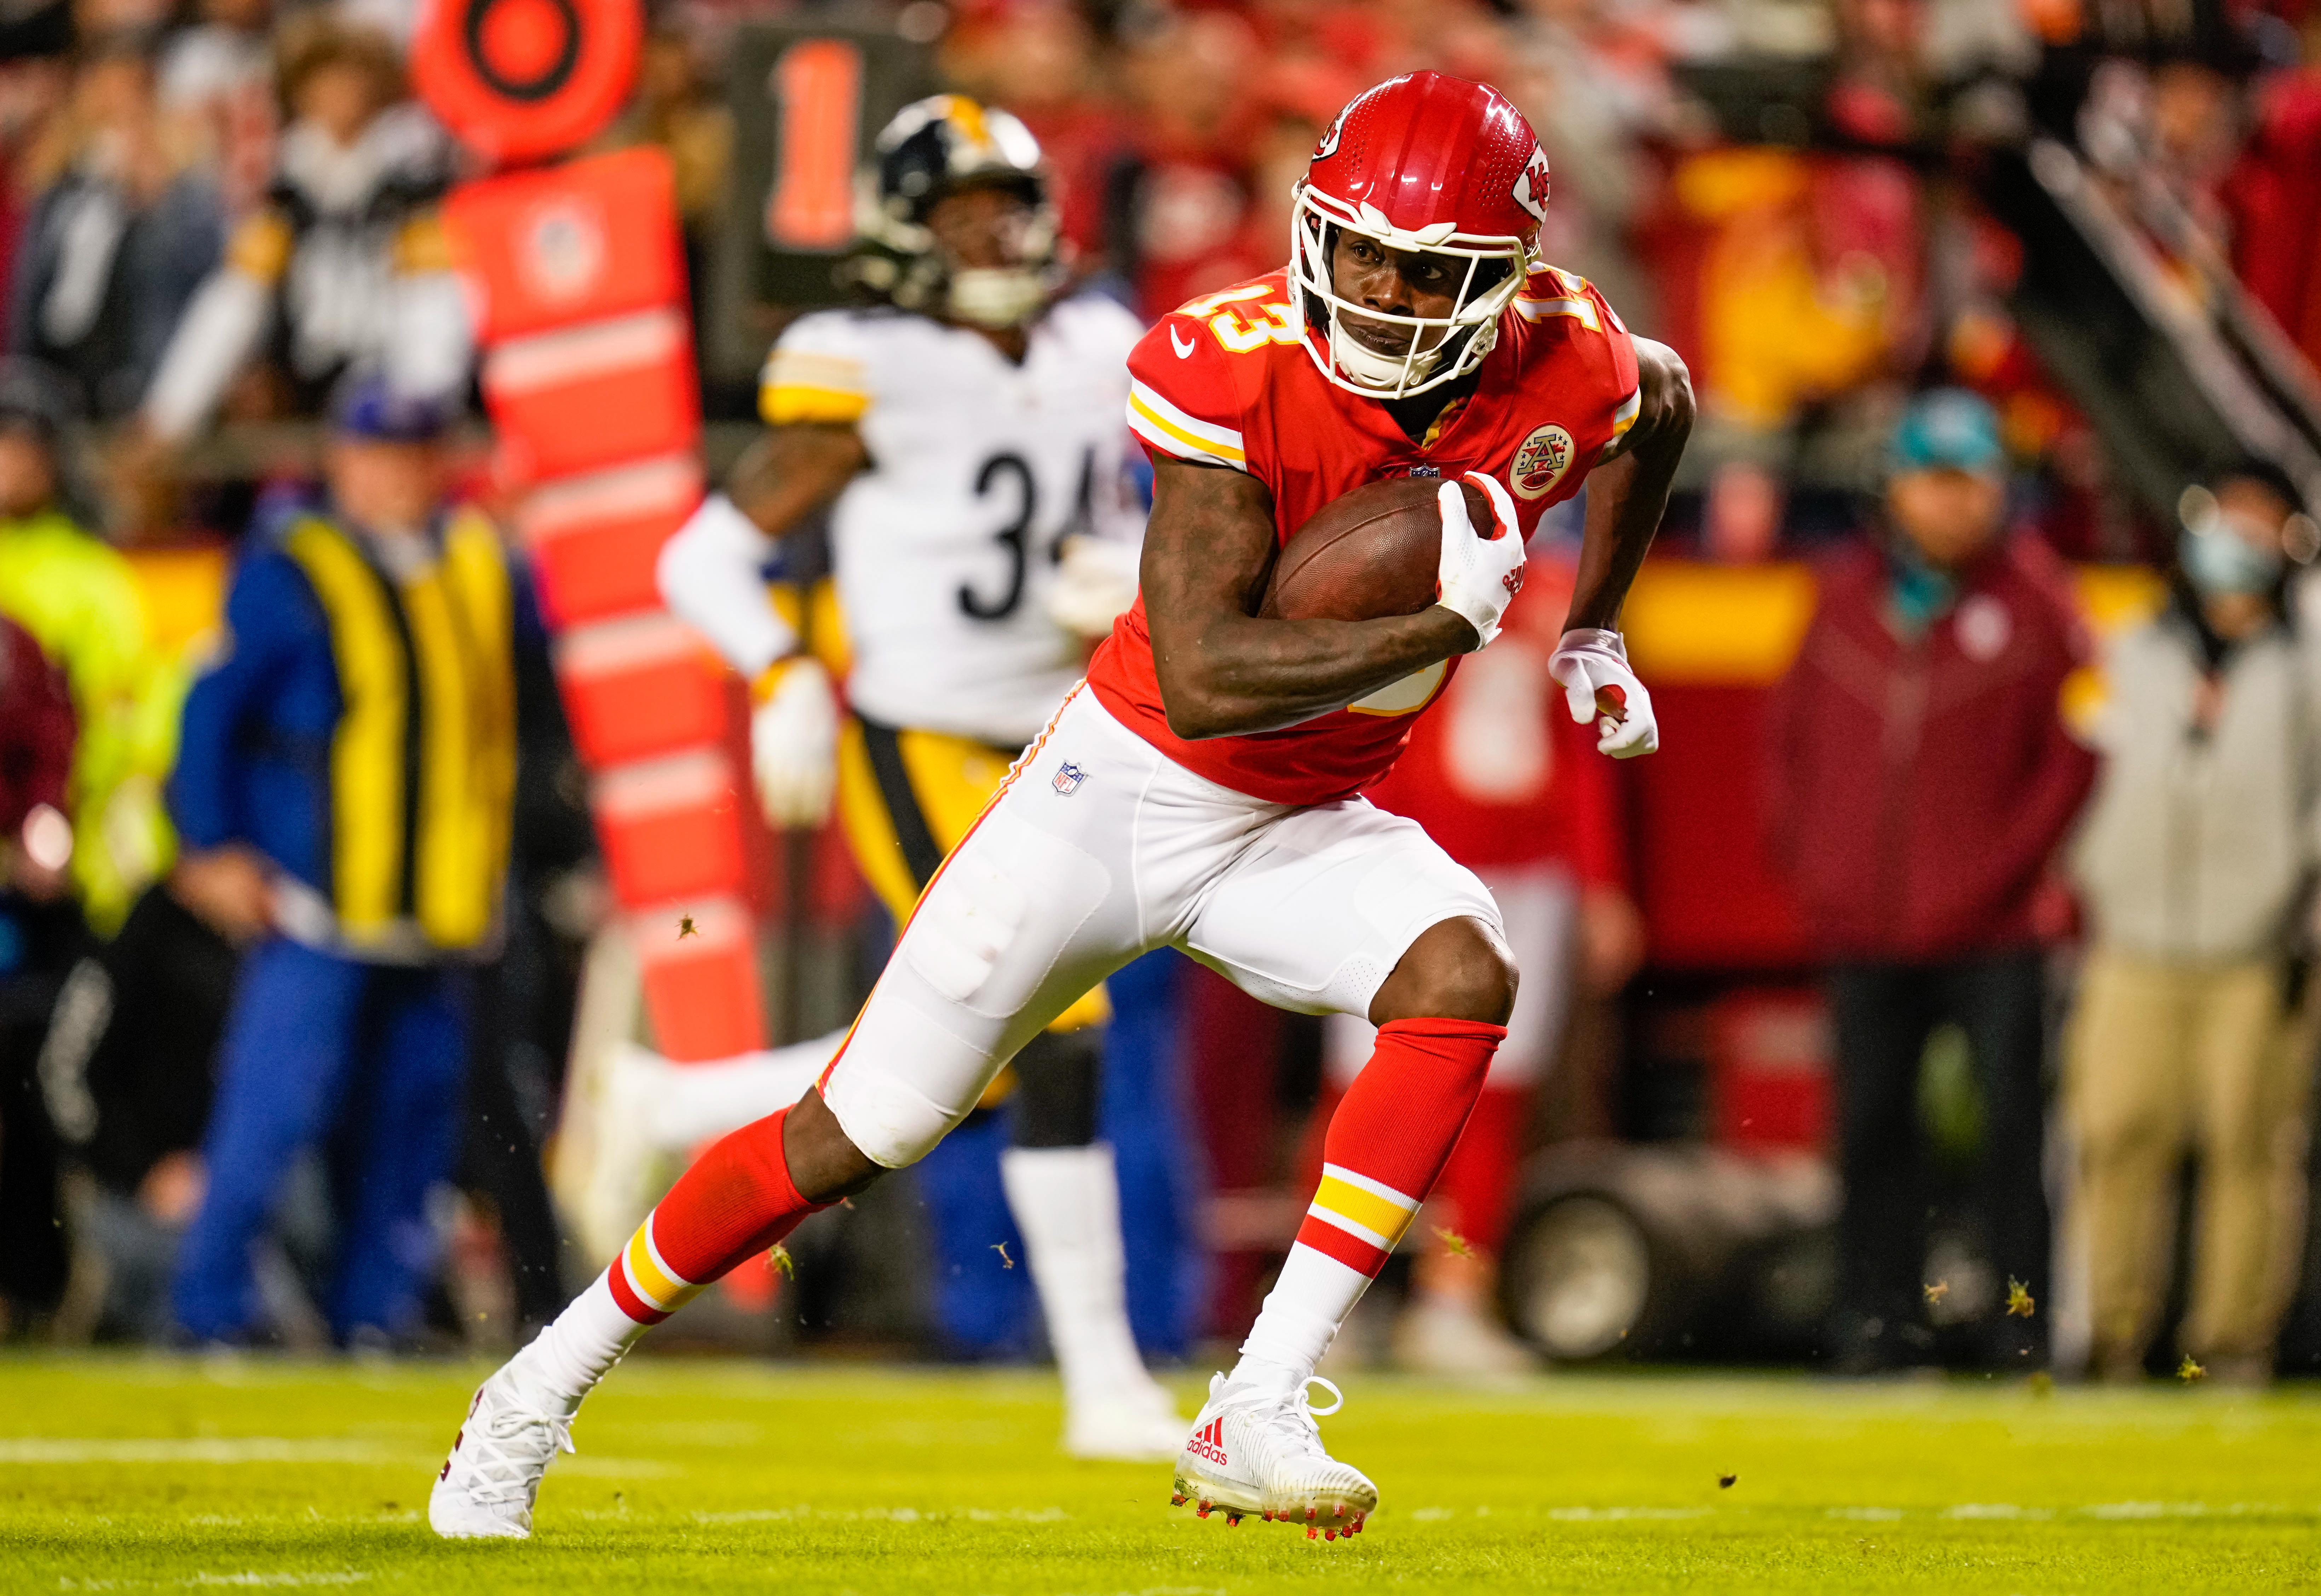 Kansas City Chiefs wide receiver Byron Pringle (13) runs the ball against the Pittsburgh Steelers during the second half at GEHA Field at Arrowhead Stadium.